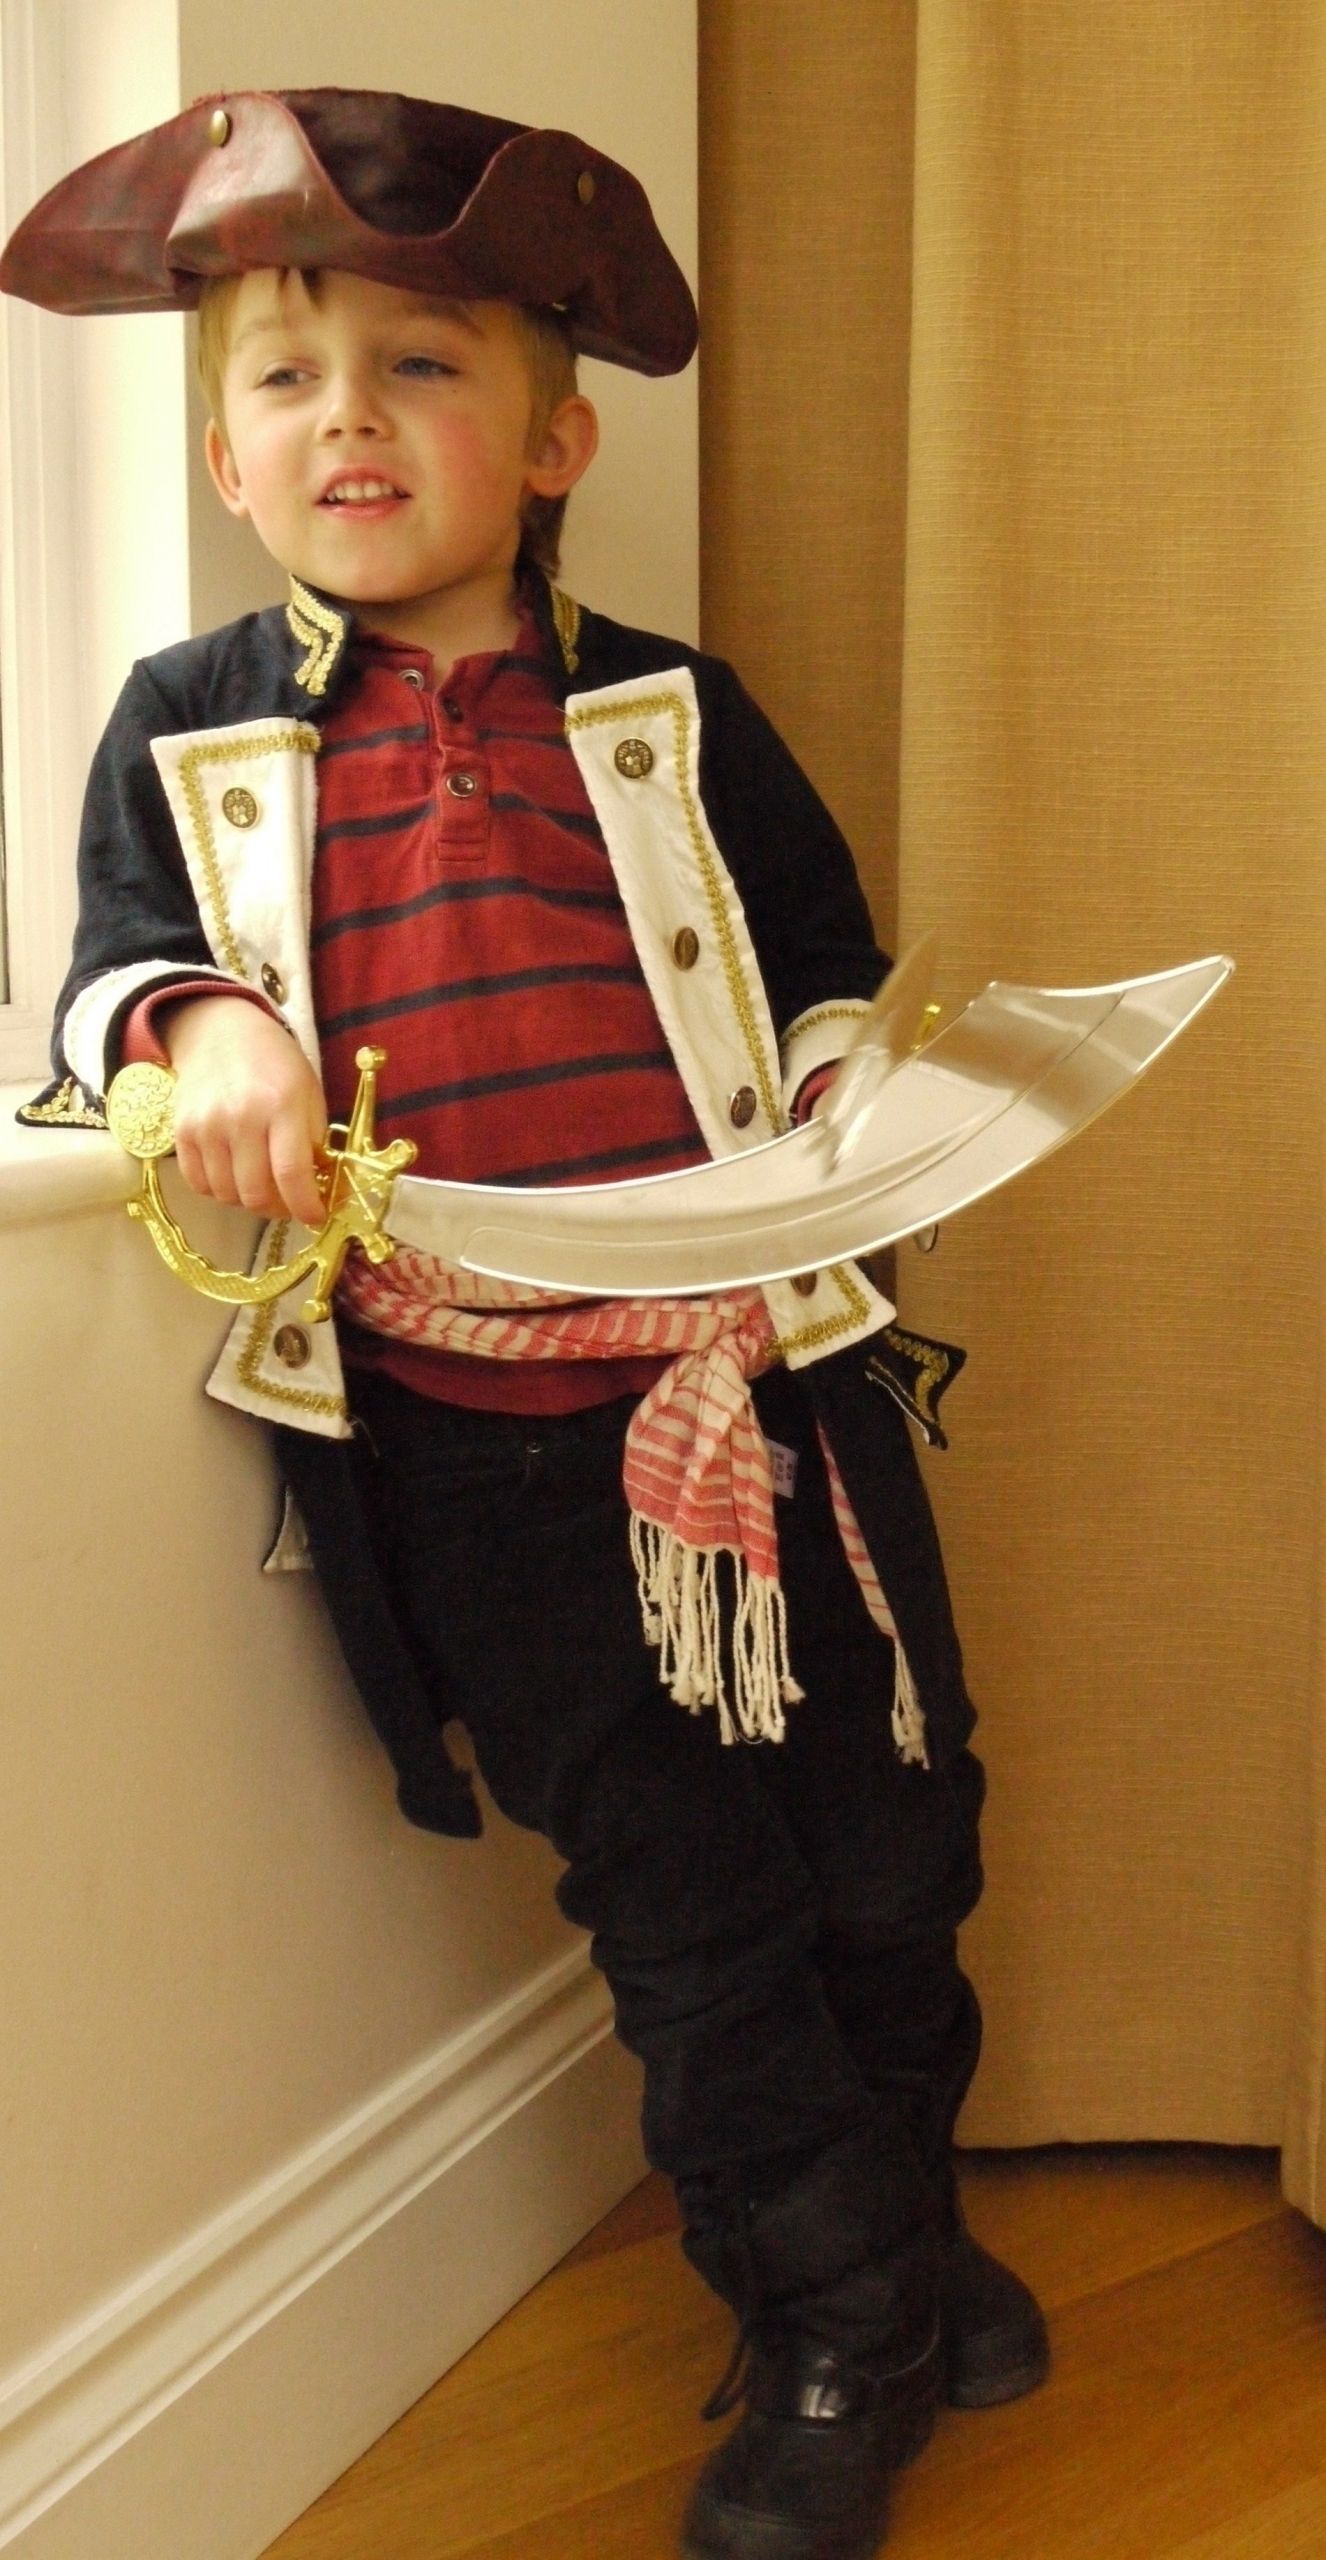 DIY Costume Ideas For Kids
 10 Attractive Homemade Pirate Costume Ideas For Kids 2019